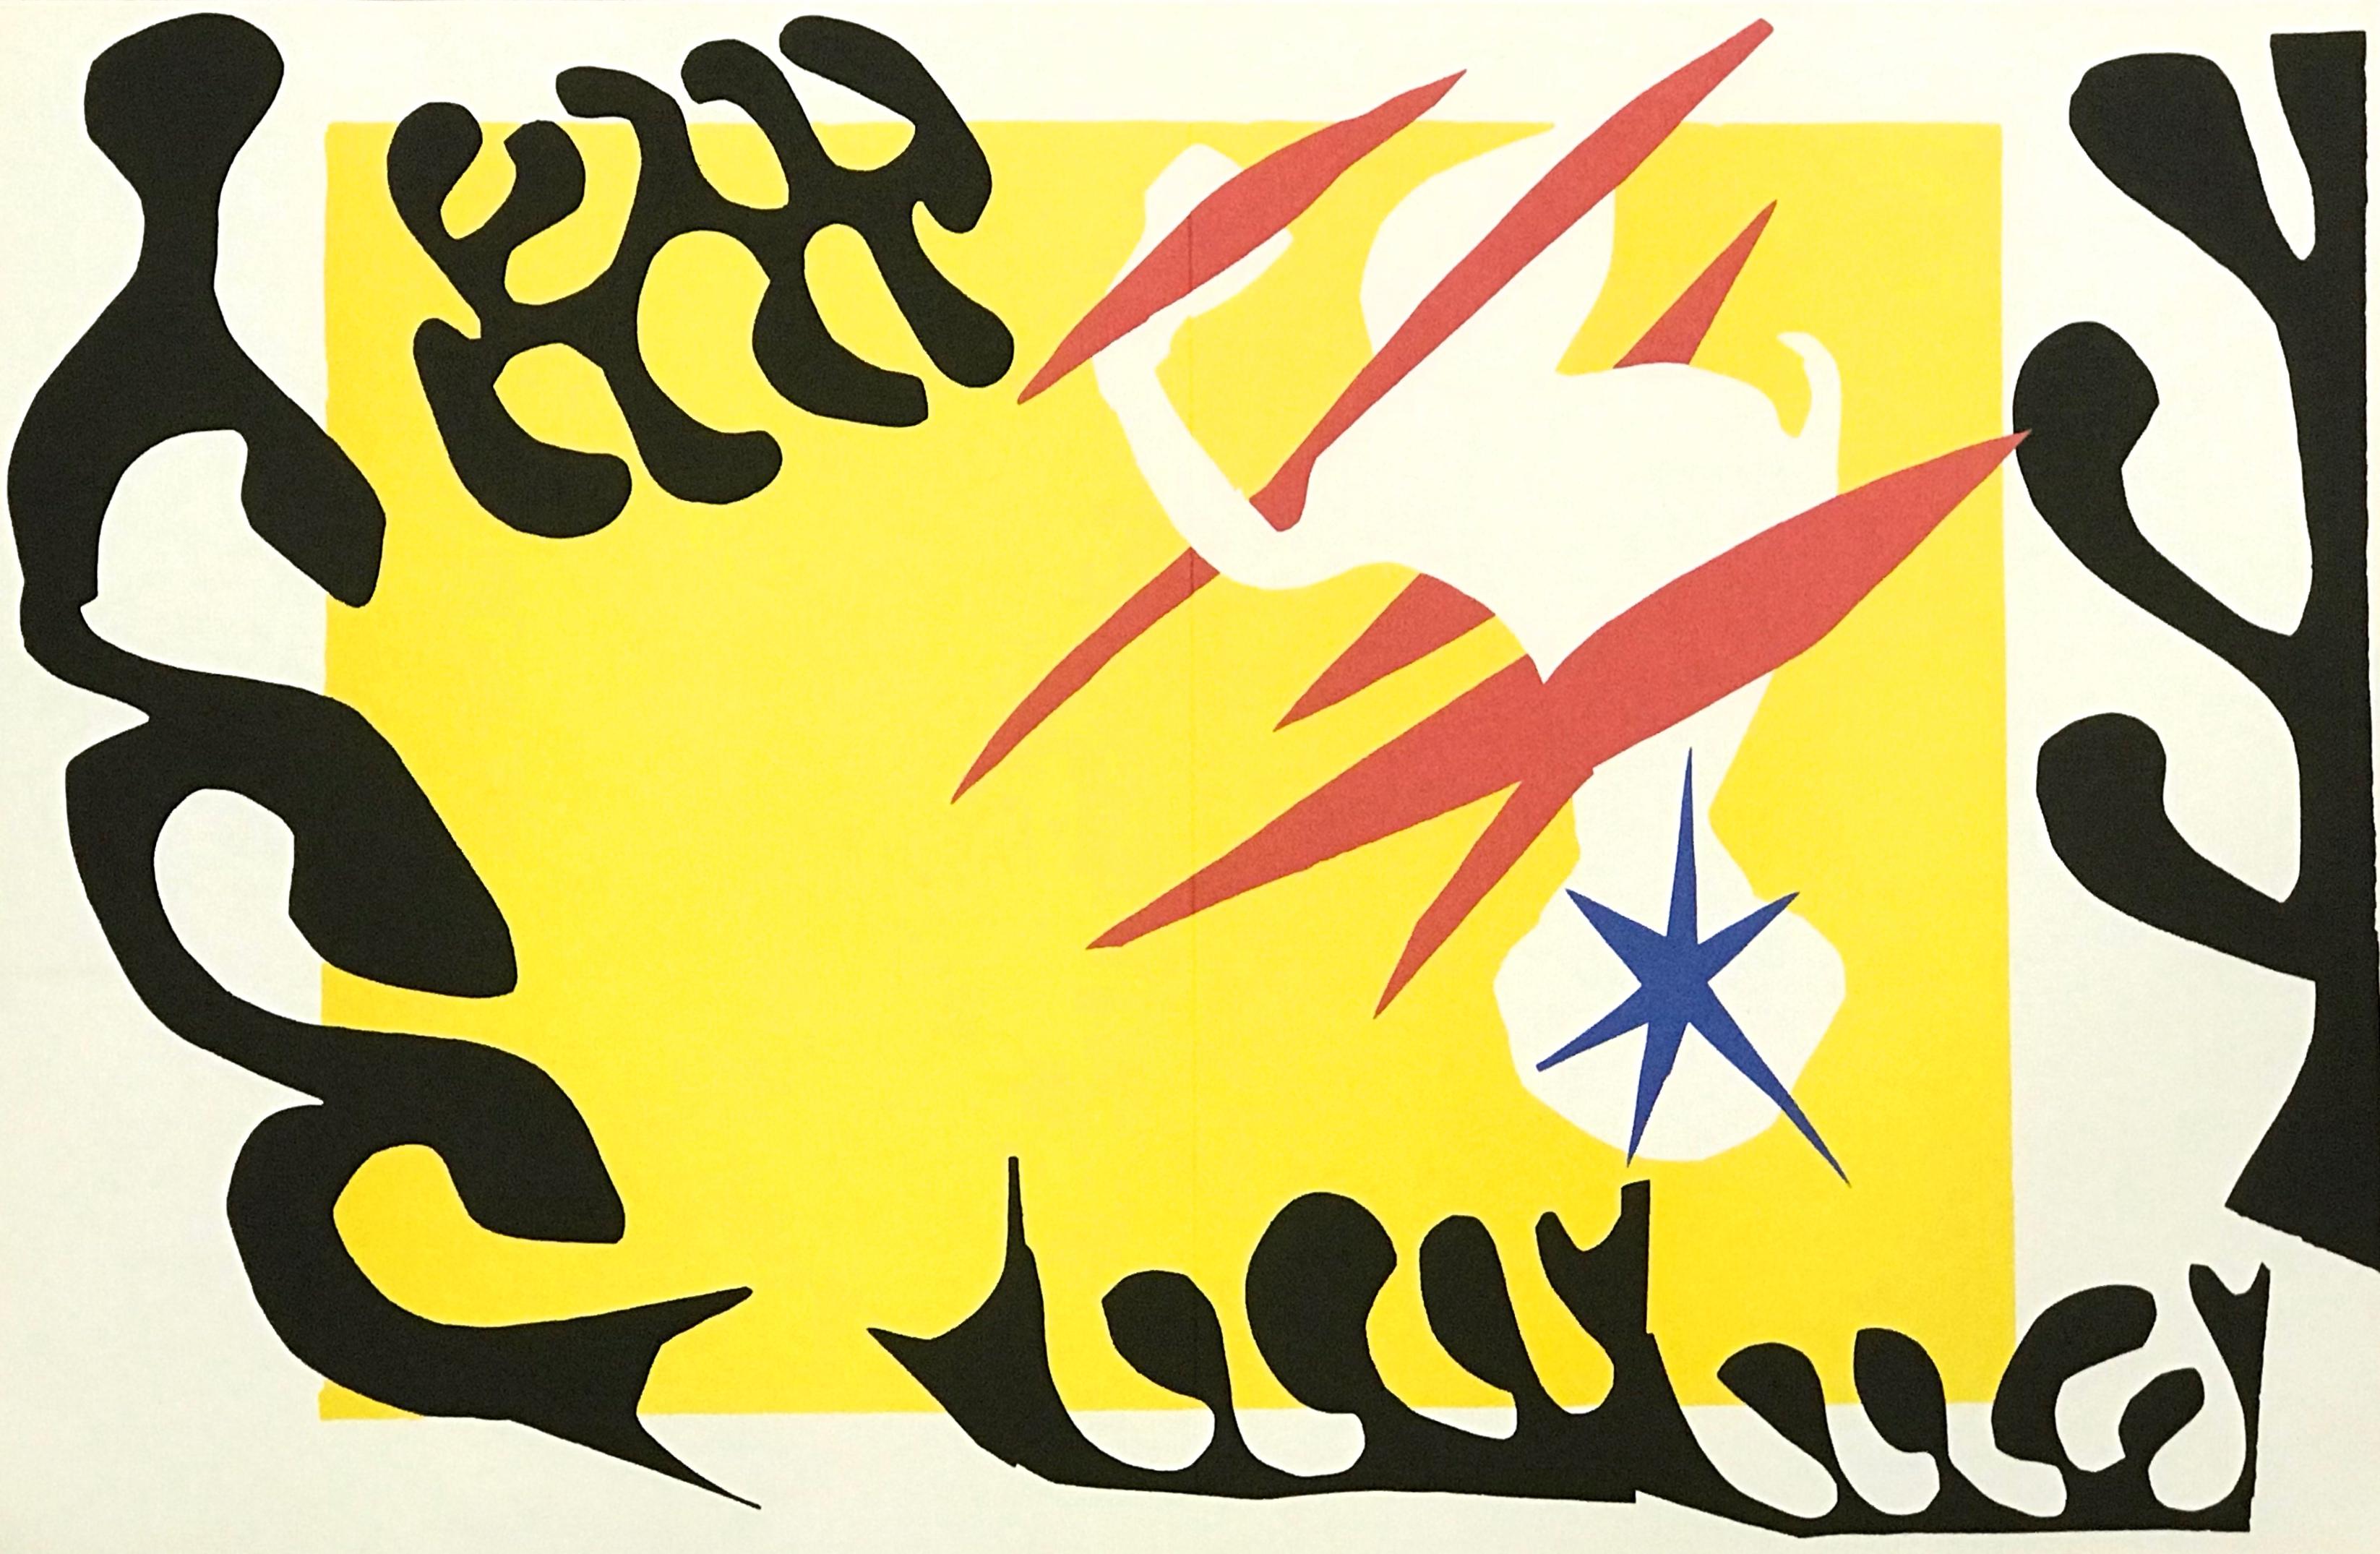 "Nightmare of the White Elephant" from Jazz - Print by (after) Henri Matisse